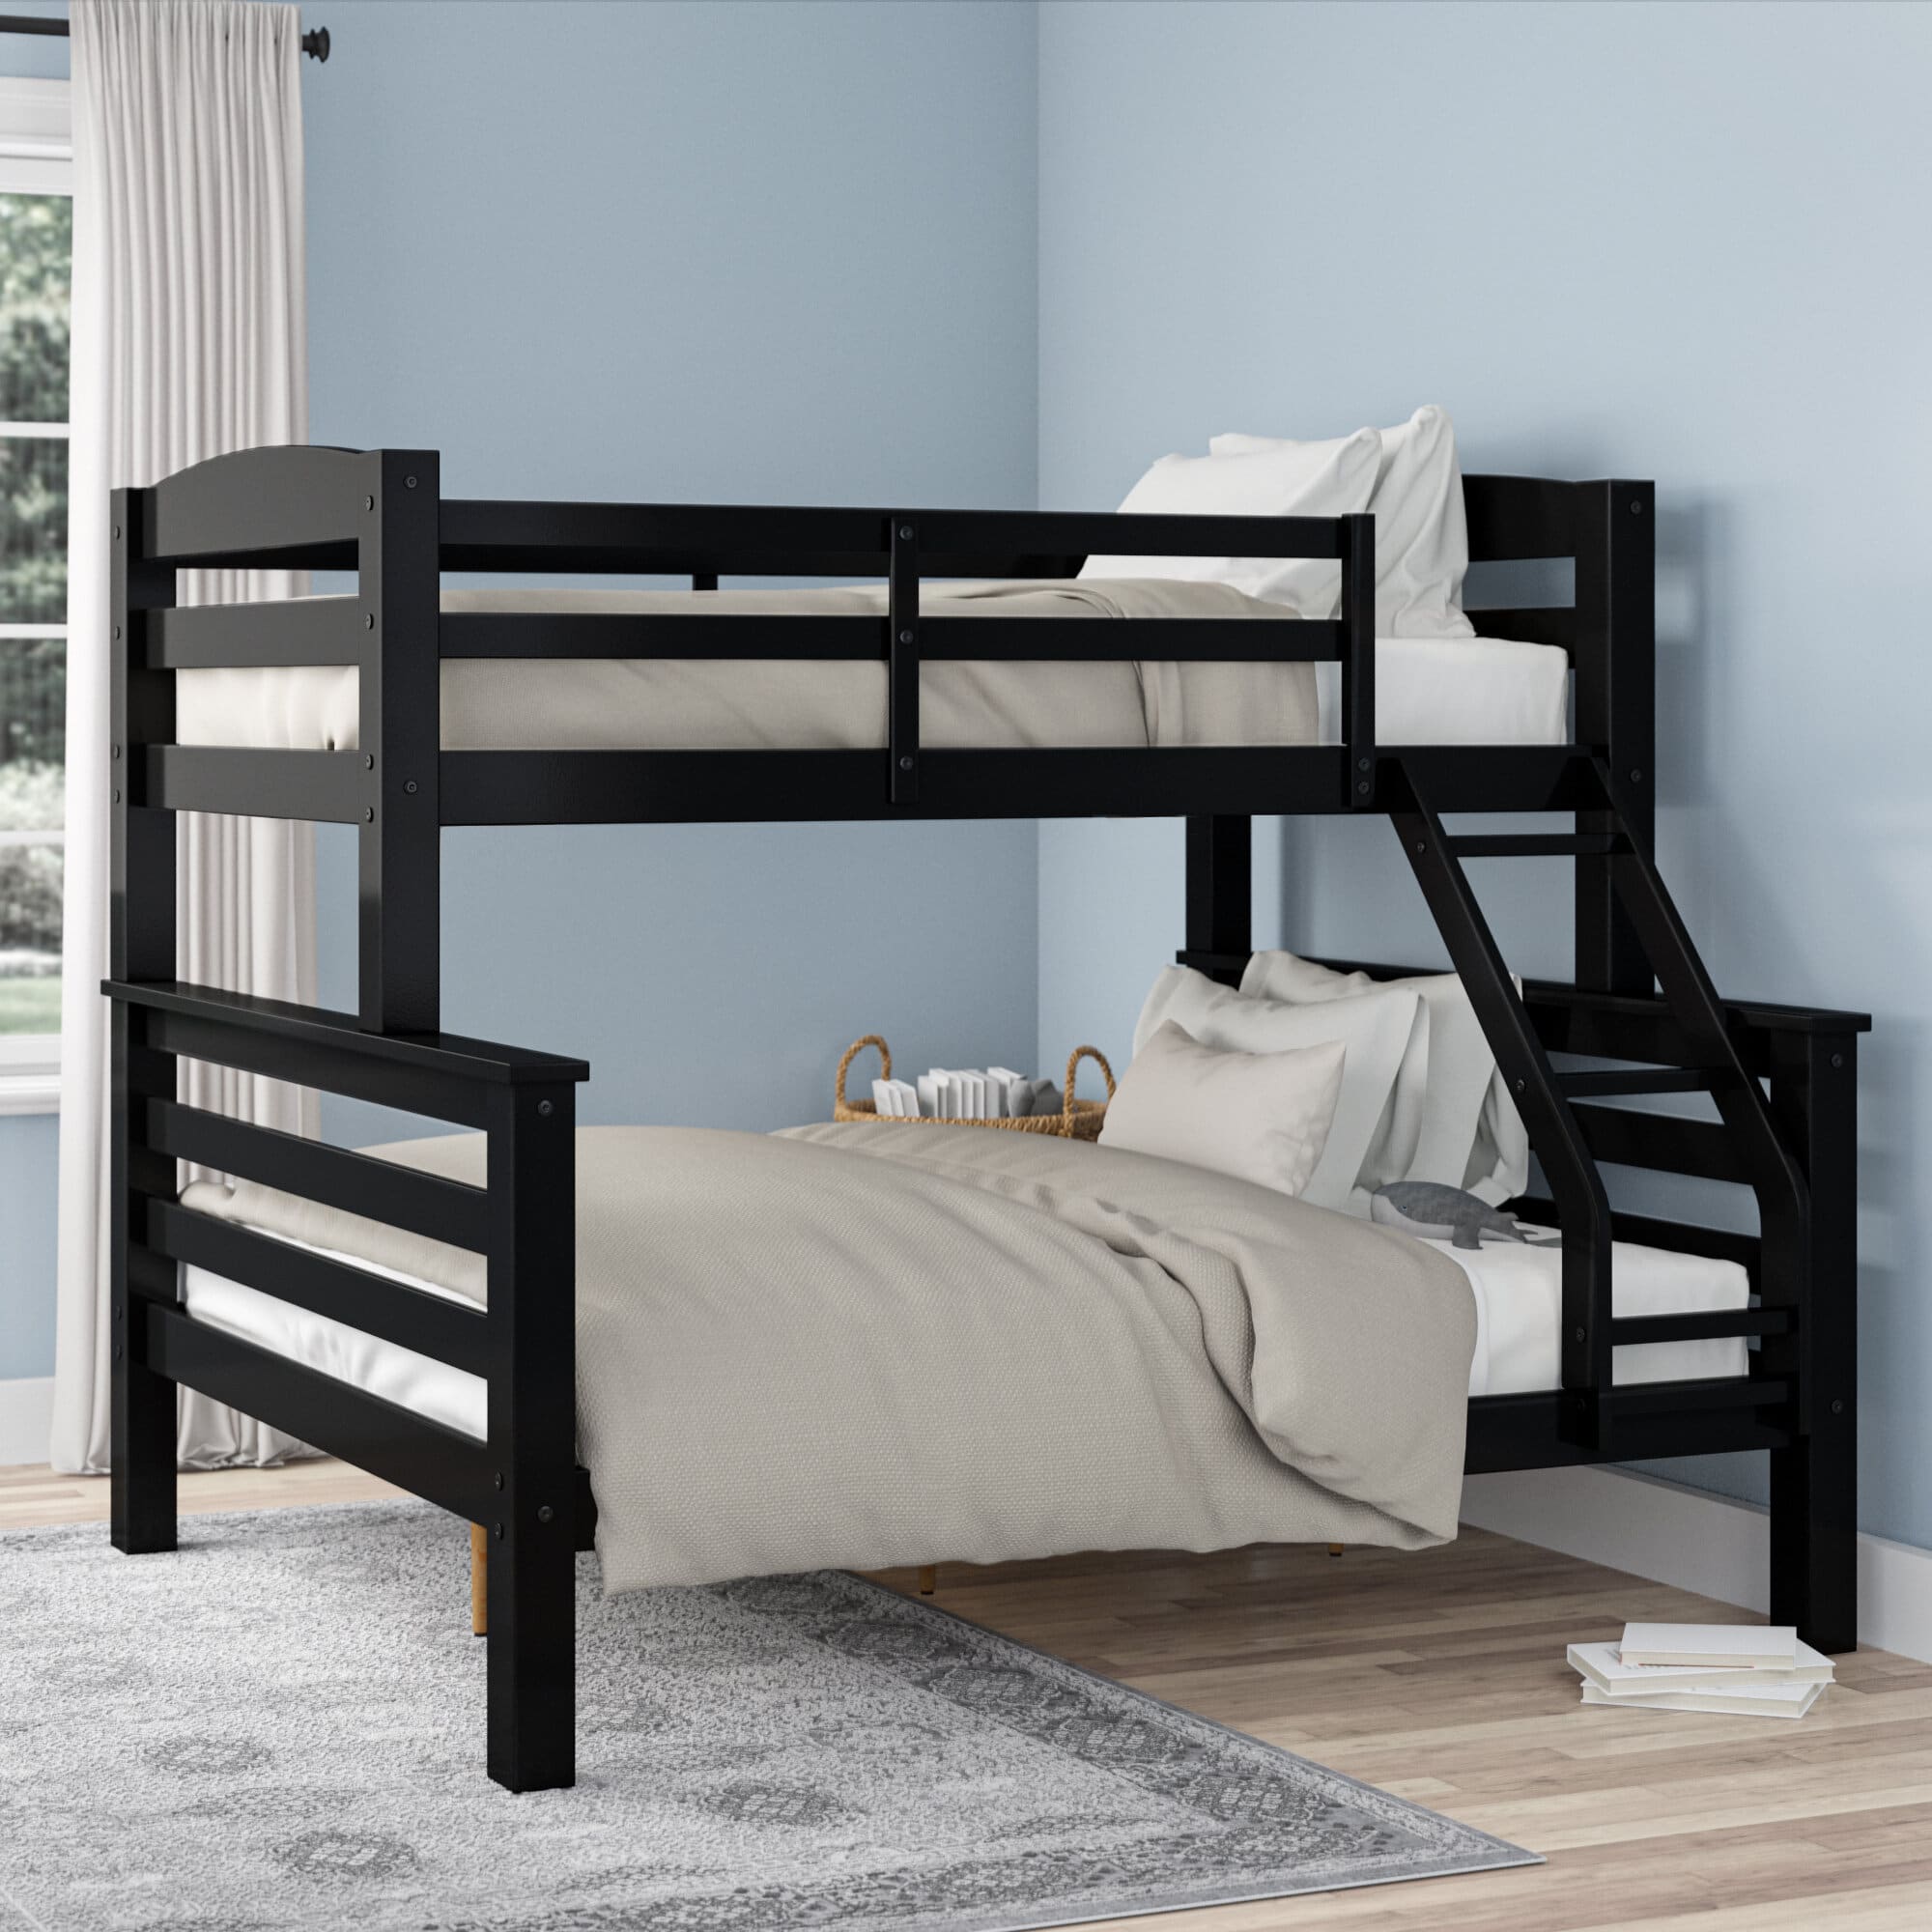 6 Best Twin Over Full Bunk Beds May, Twin Over Twin Bunk Beds With Mattresses Included